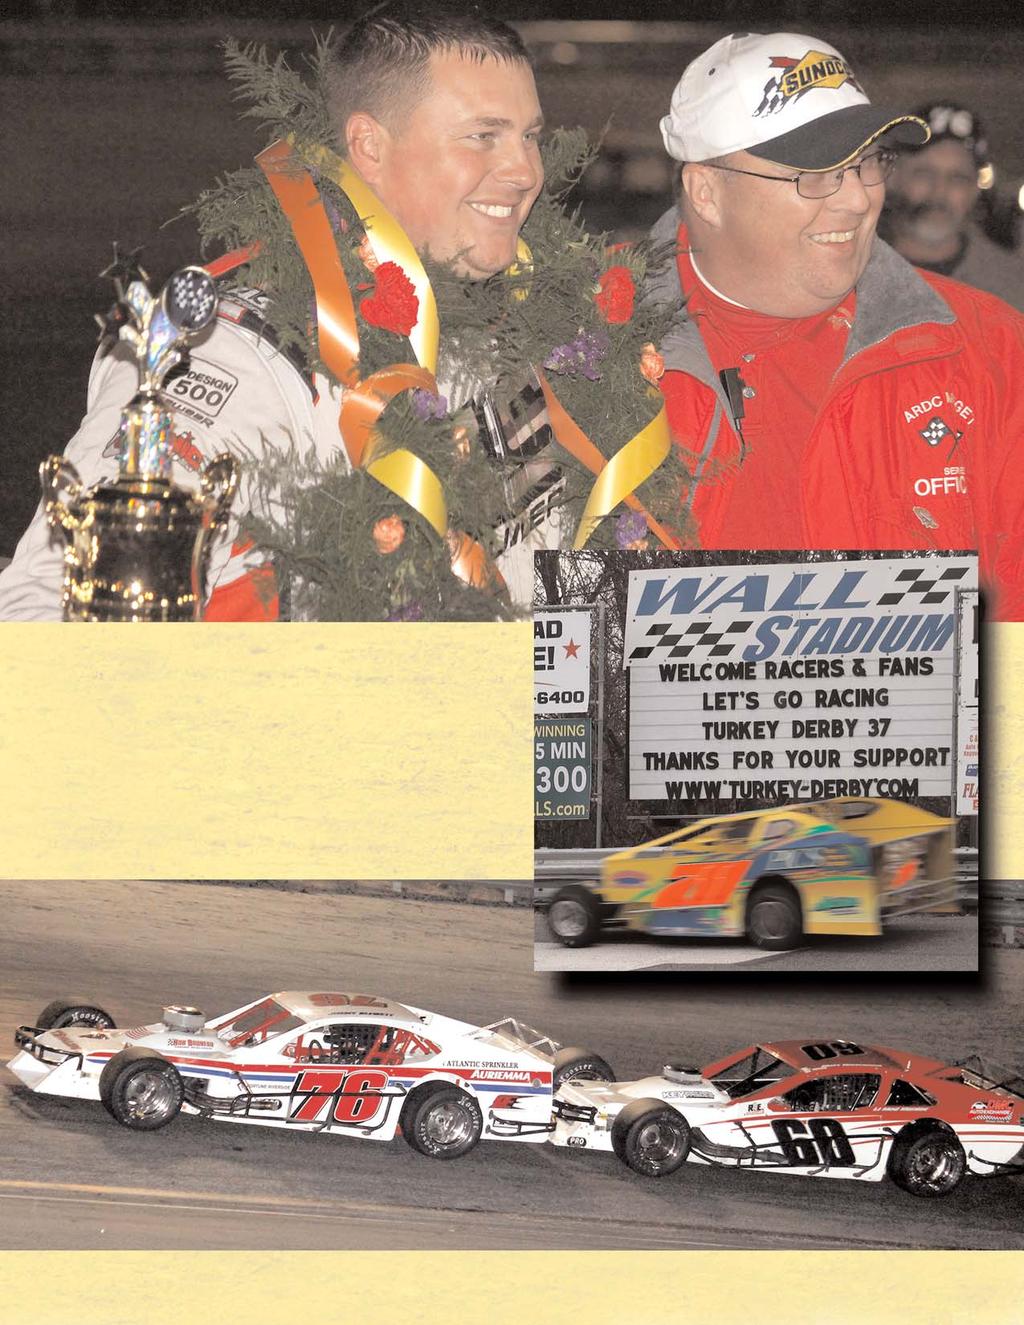 Top: 2010 Turkey Derby winner, Jimmy Blewett, with Warren Alston, Wall Stadium's starter. Below: Some of the bumping as racers compete for position.